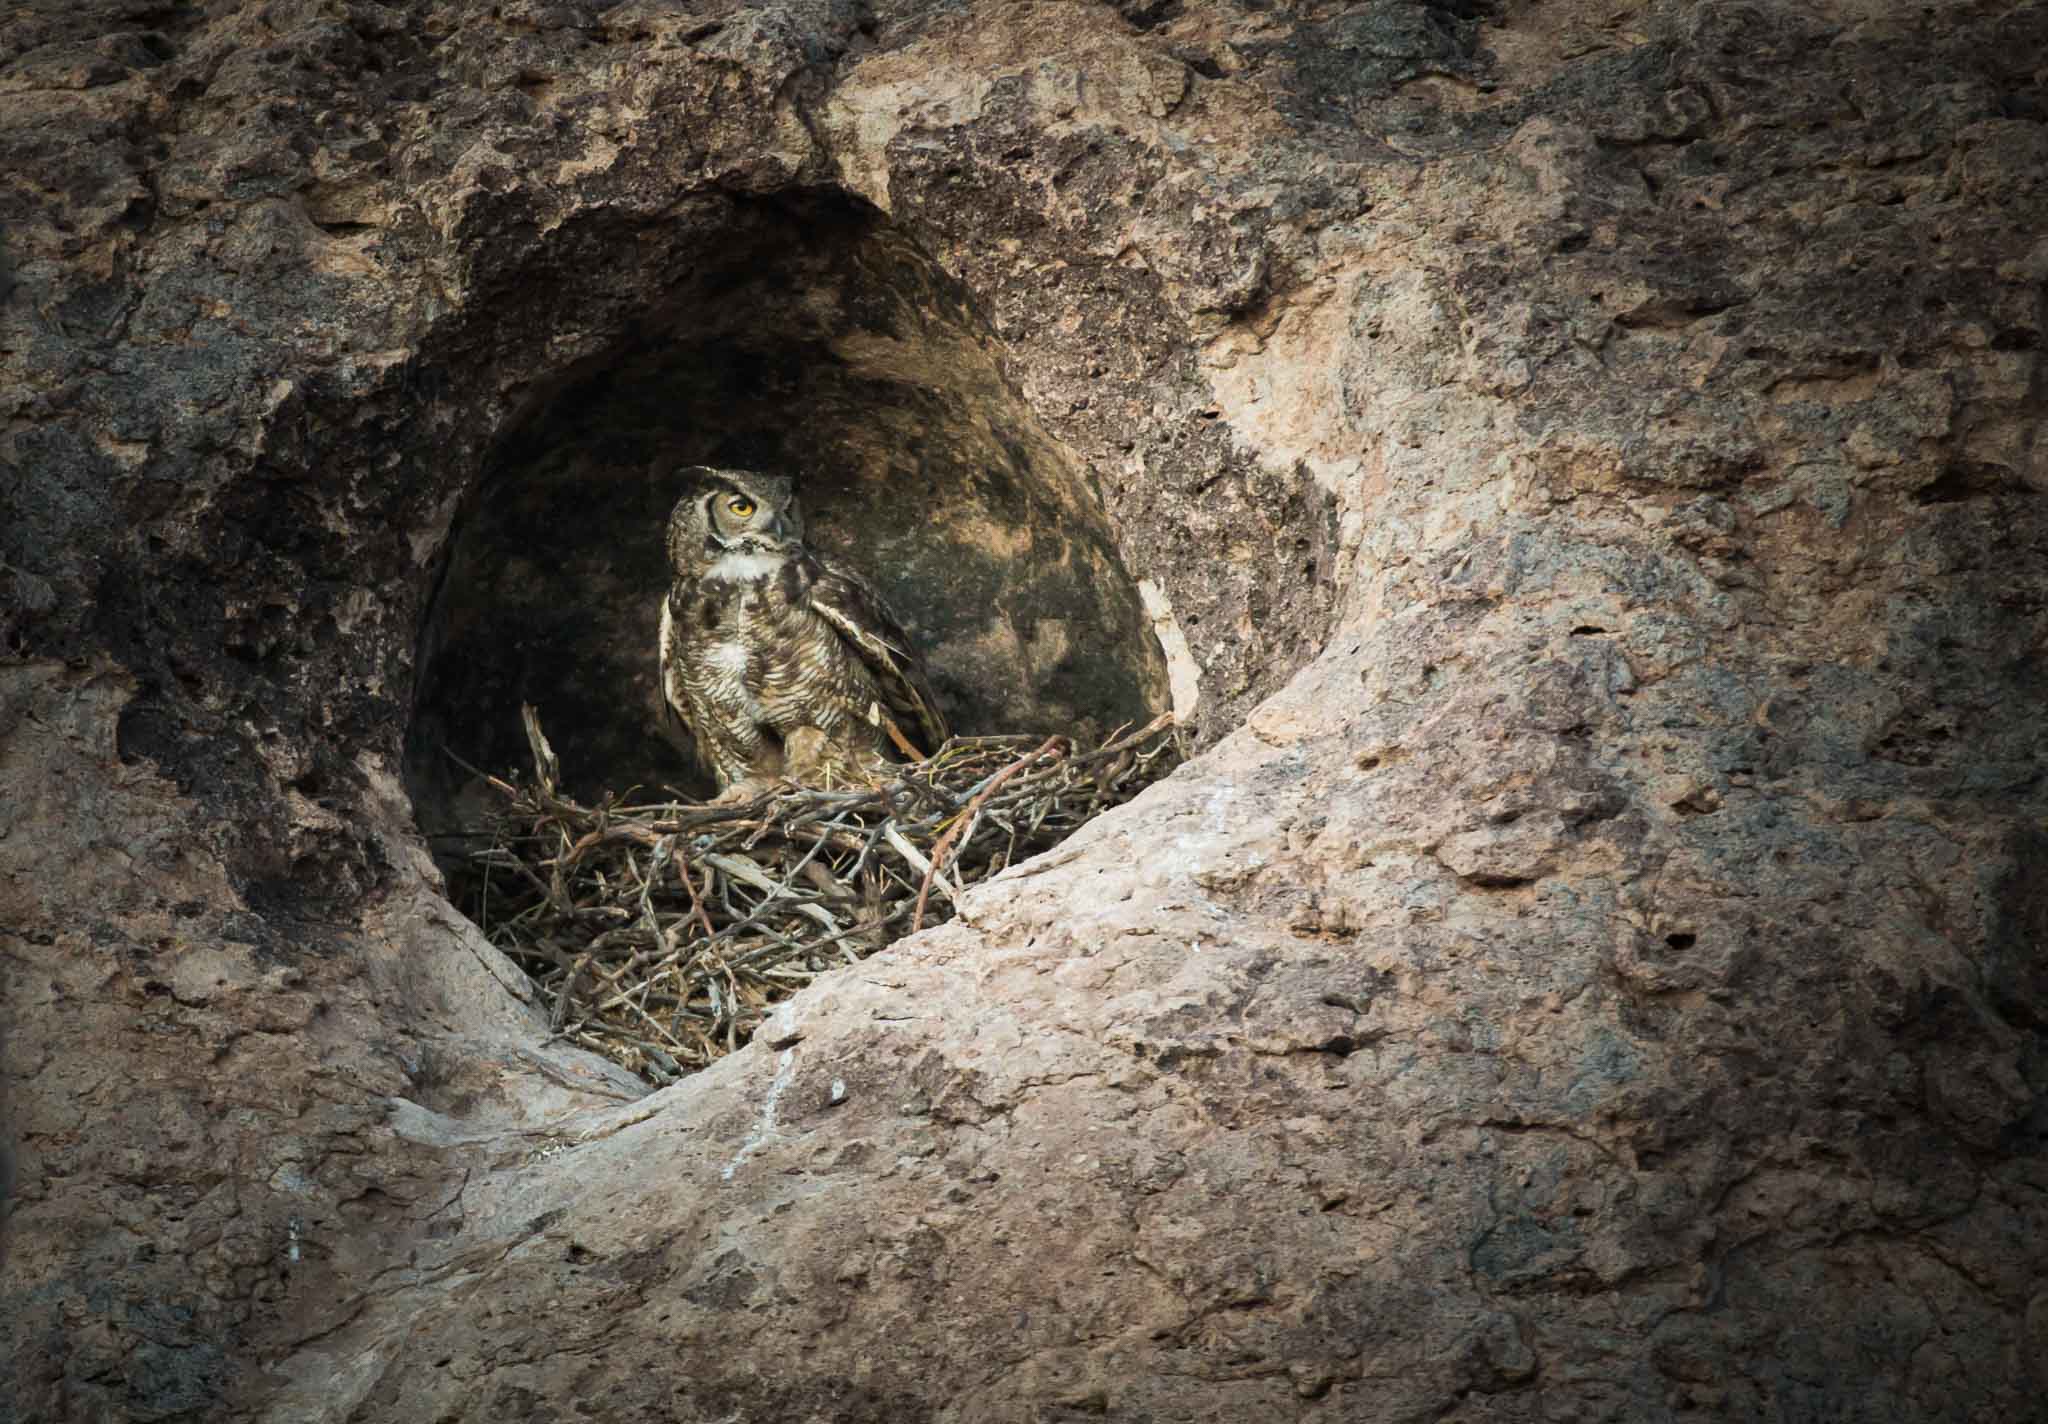 Great Horned Owl on nest in rock, City of Rocks State Park, Faywood NM, April 11, 2016